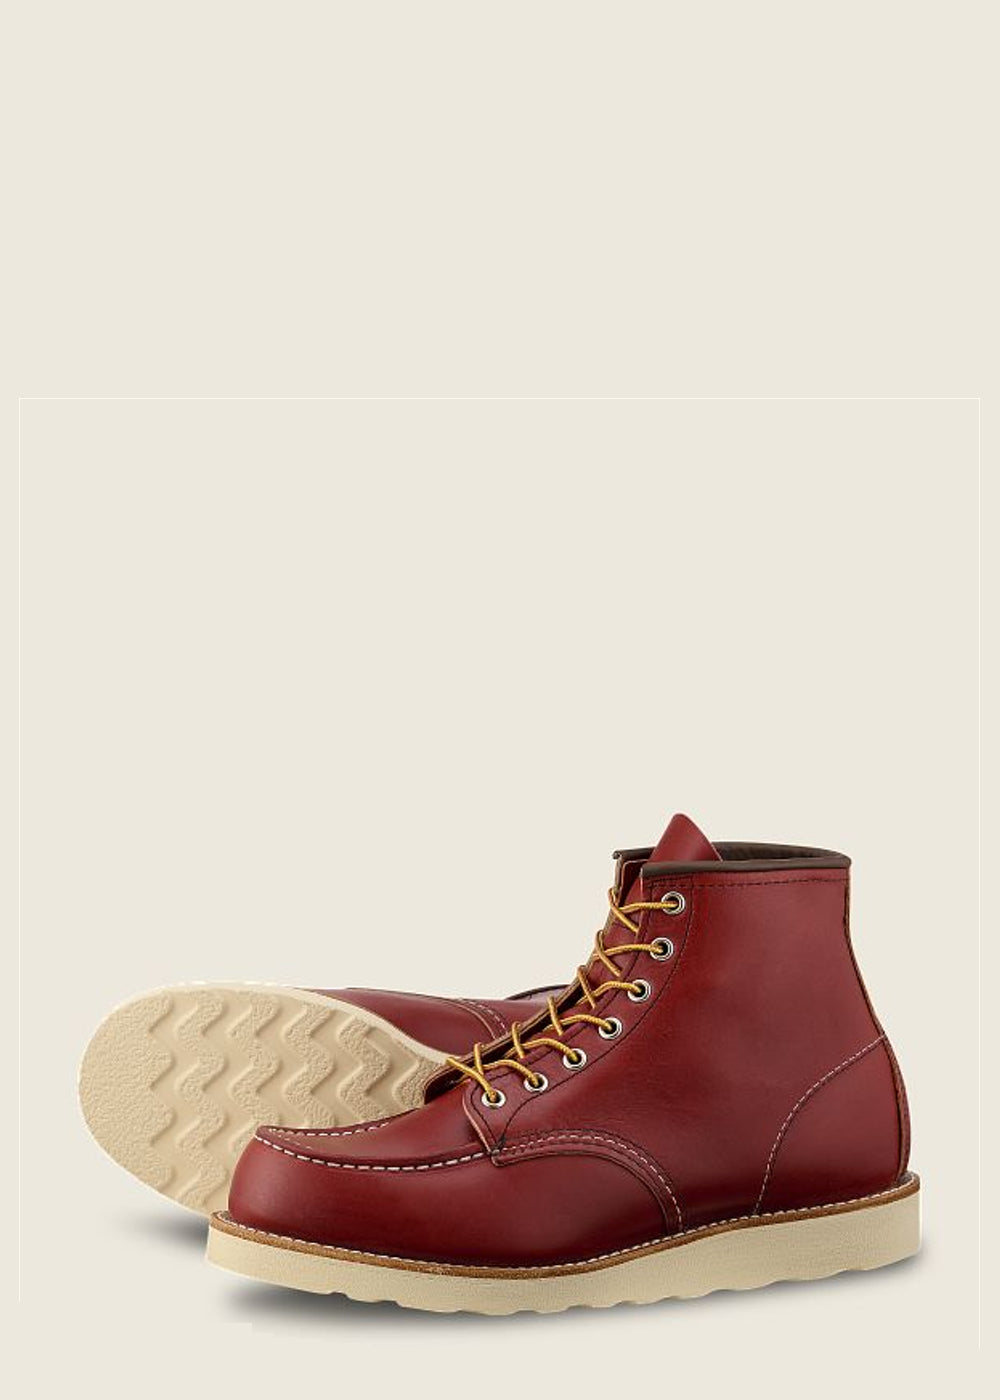 Red Wing 8875 6 Inch Moc Oro Russet